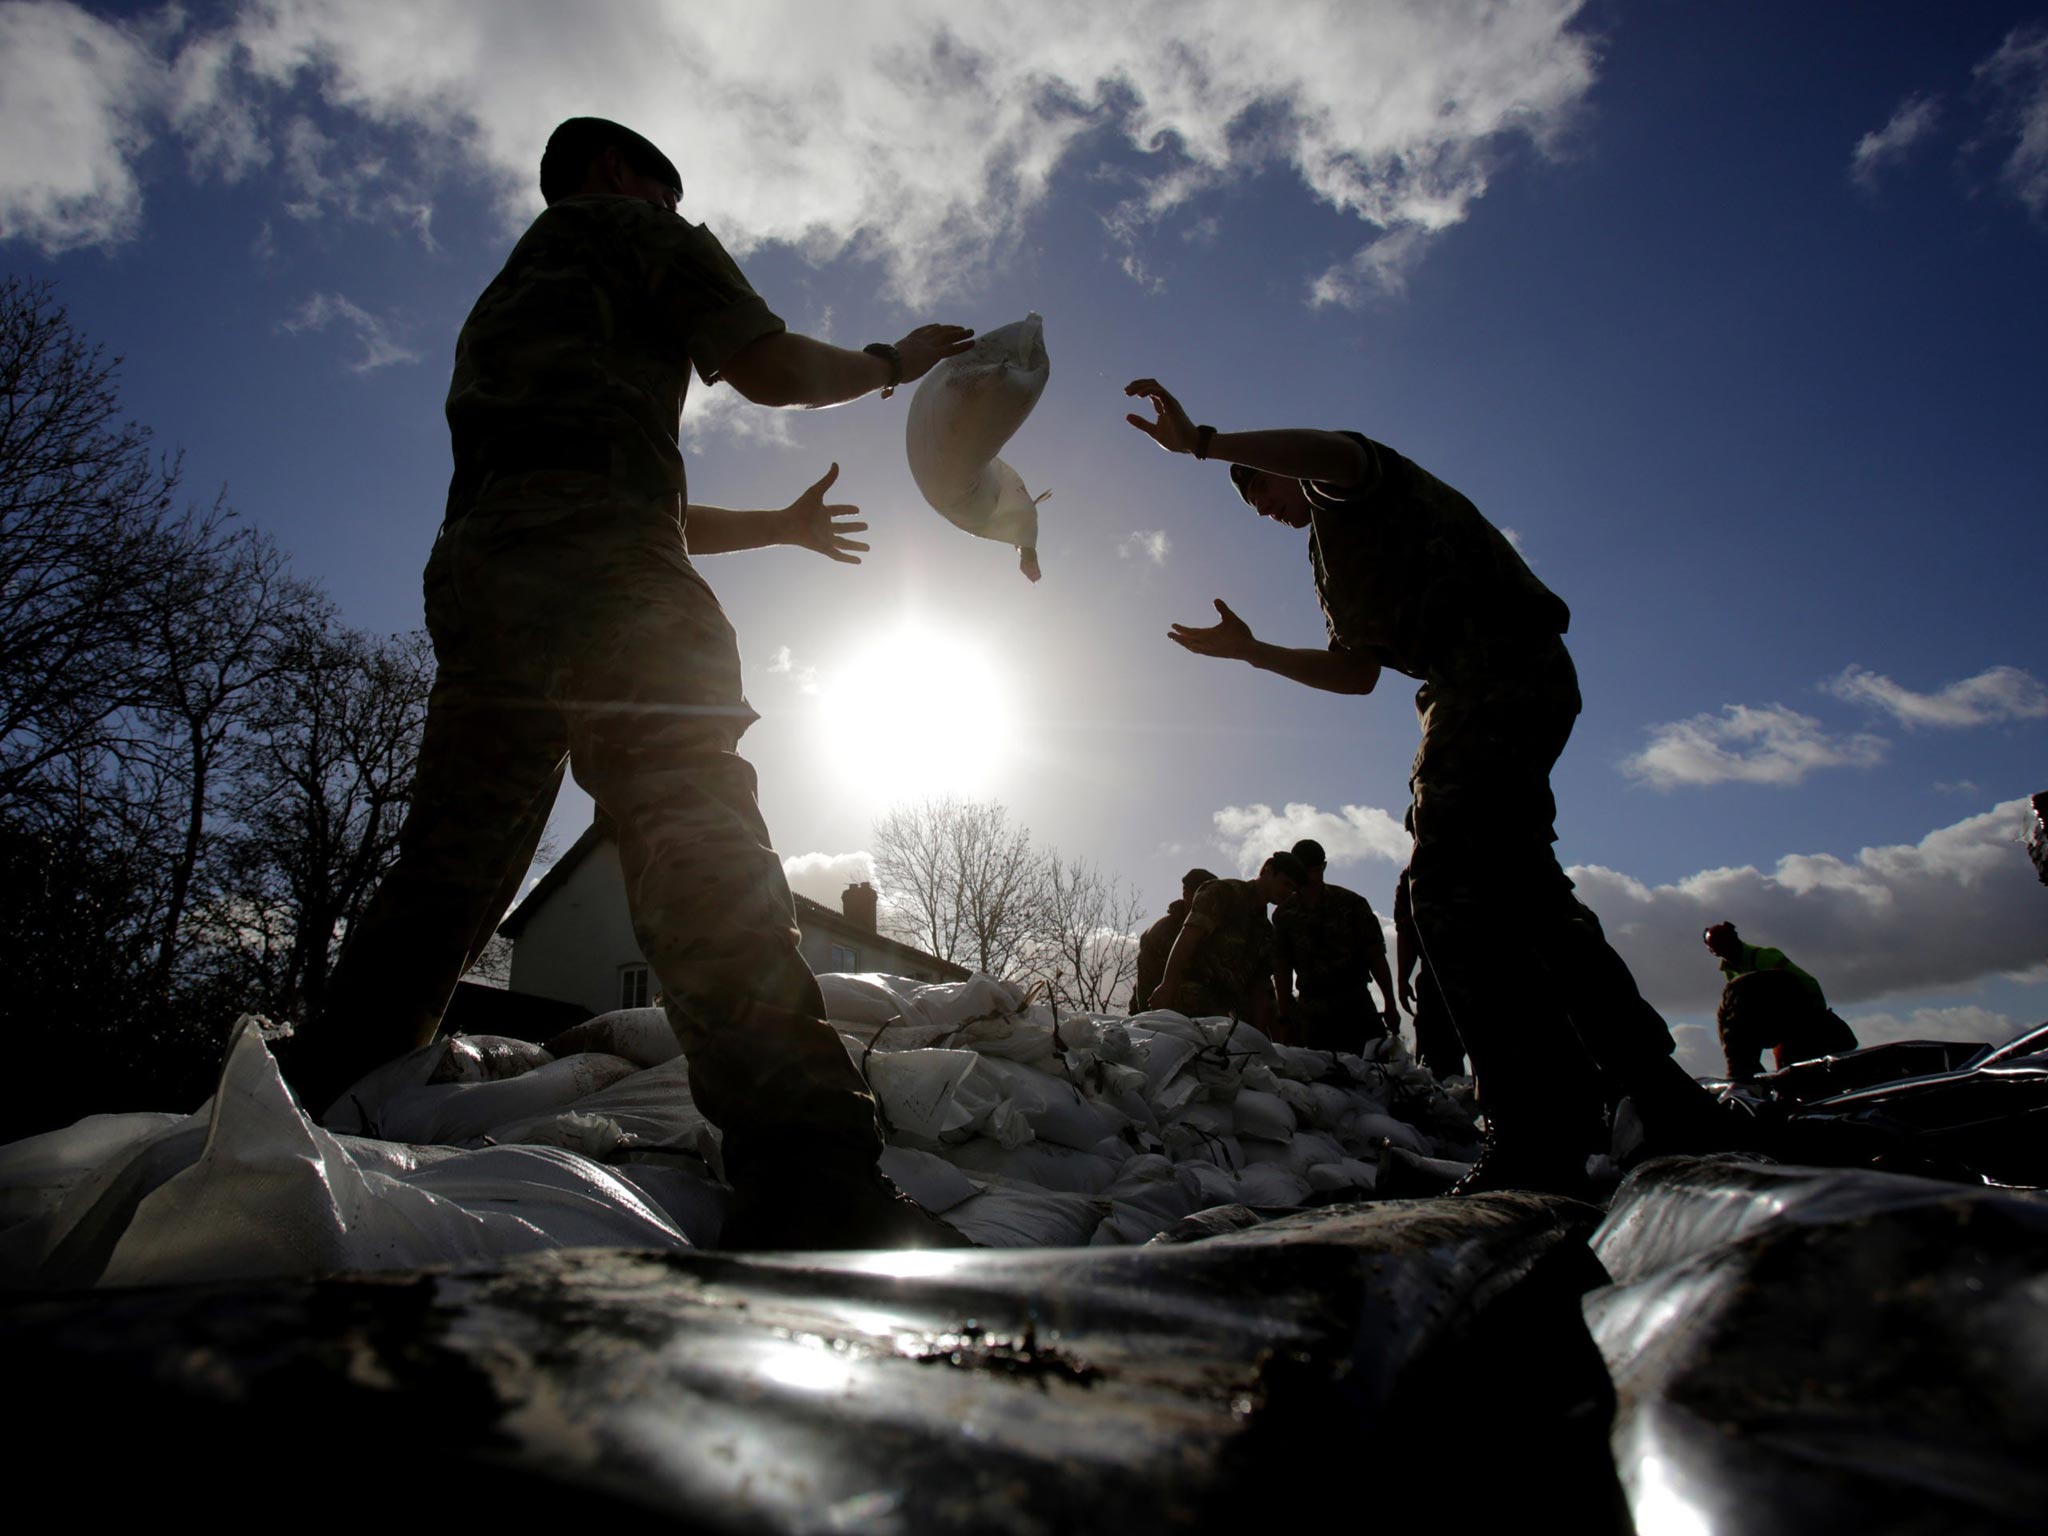 Marines from 40 Commando help build a sandbag wall around a property in Moorland as they help with flood defences on the Somerset Levels near Bridgwater